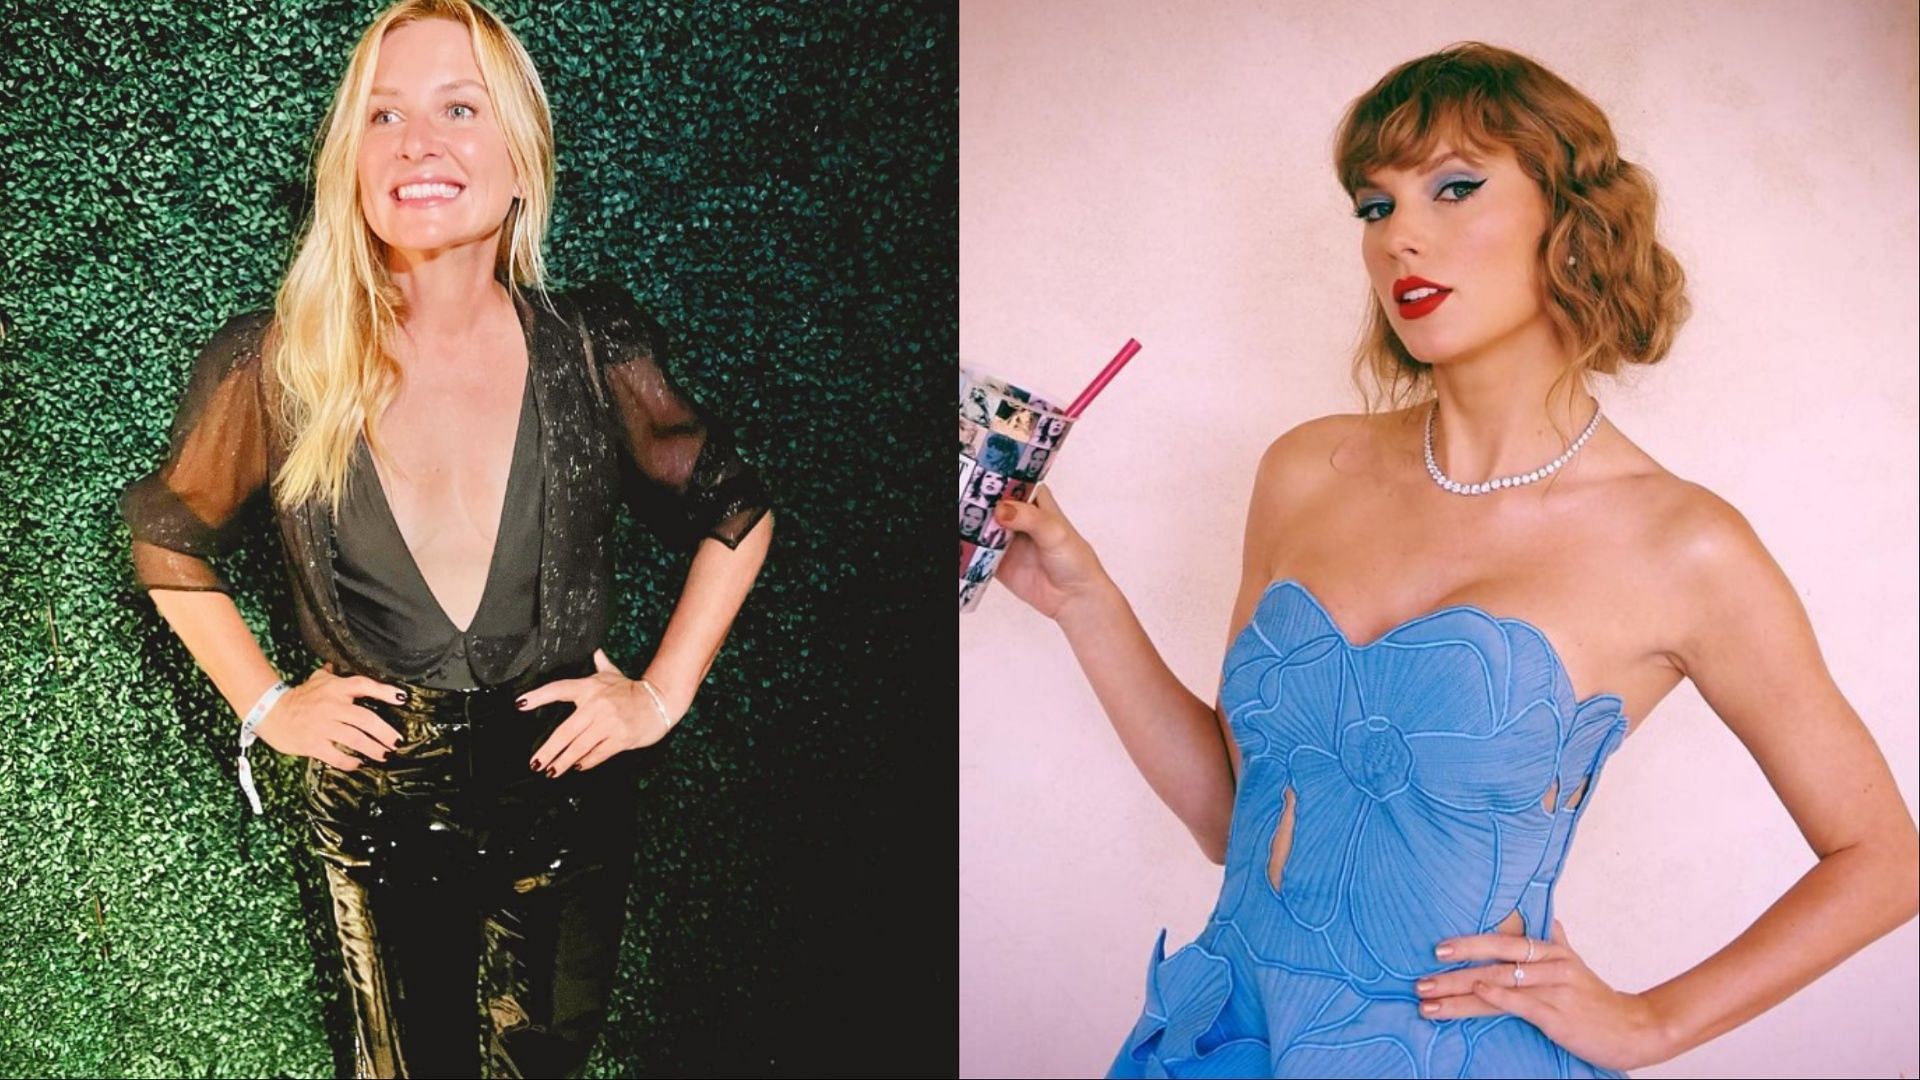 Jessica Capshaw recounts relationship with Taylor Swift on The Drew Barrymore Show (Image via jessicacapshaw and taylorswift/Instagram)